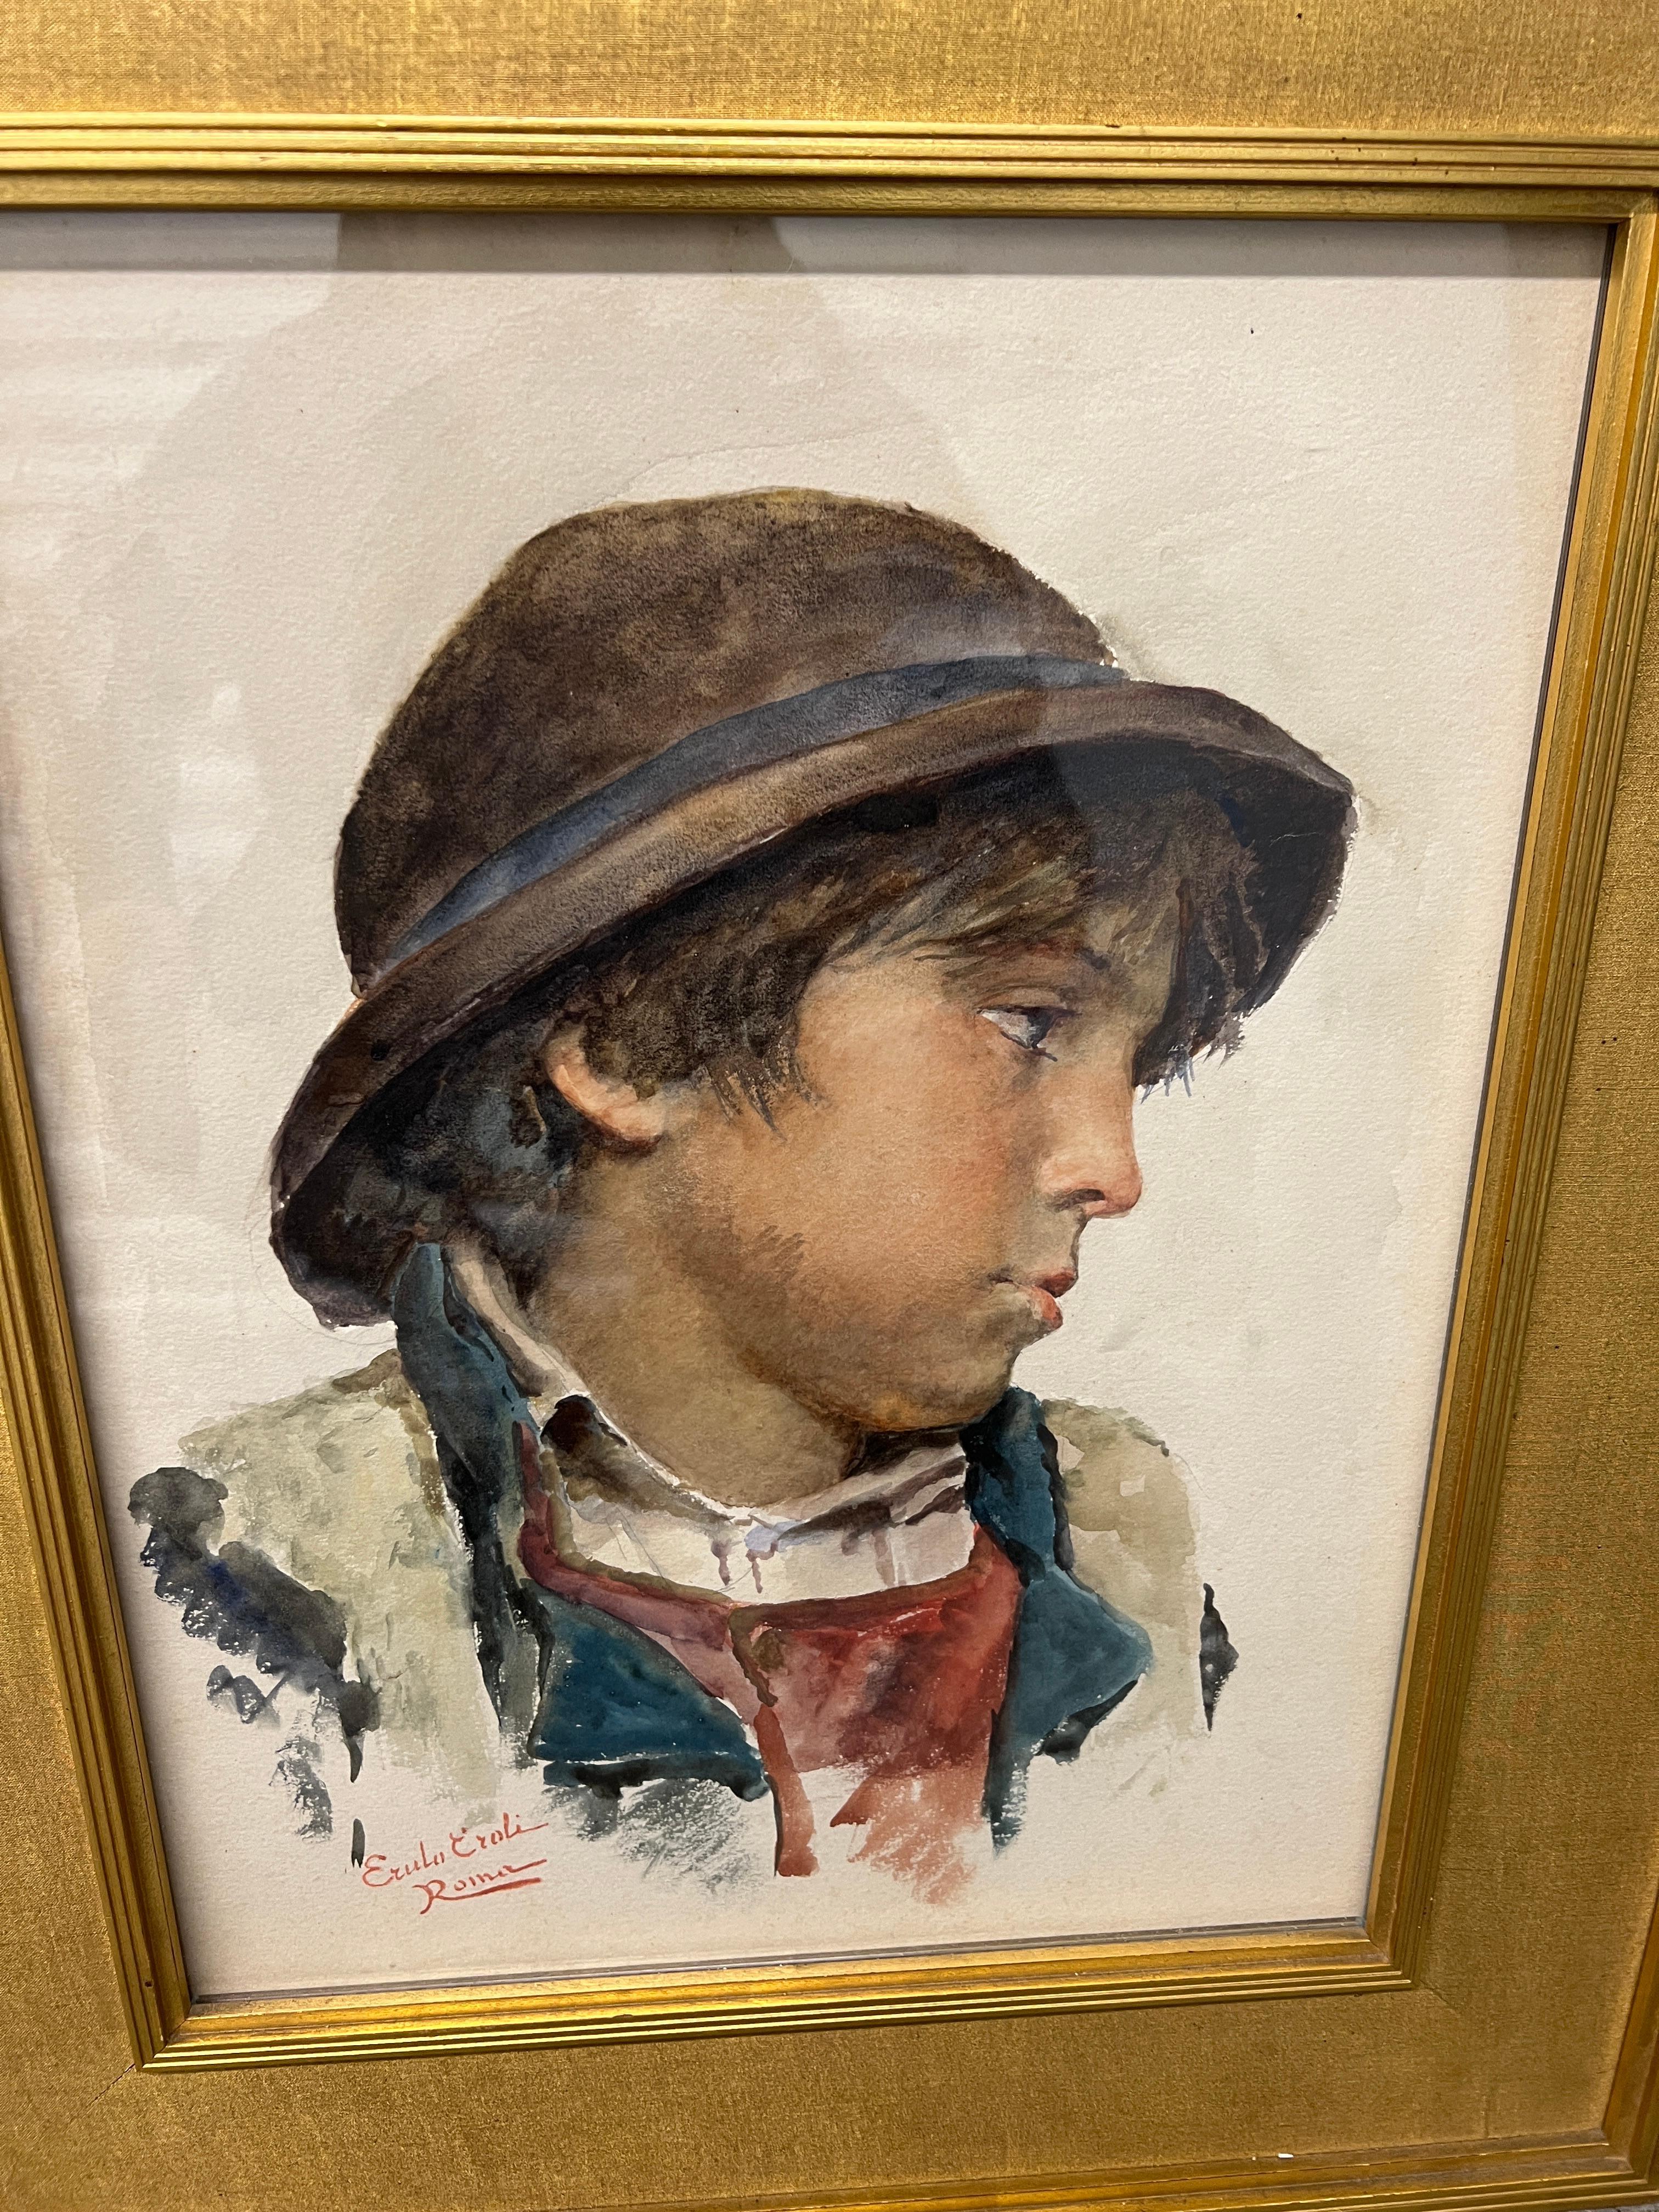 Erulo Eroli (Italian, 1854-1916), circa 1900.

An accomplished watercolor of a young boy. Possibly a study for a large scale piece as he was known for doing. Signed to lower left and presented in a great gilt wood frame. 

